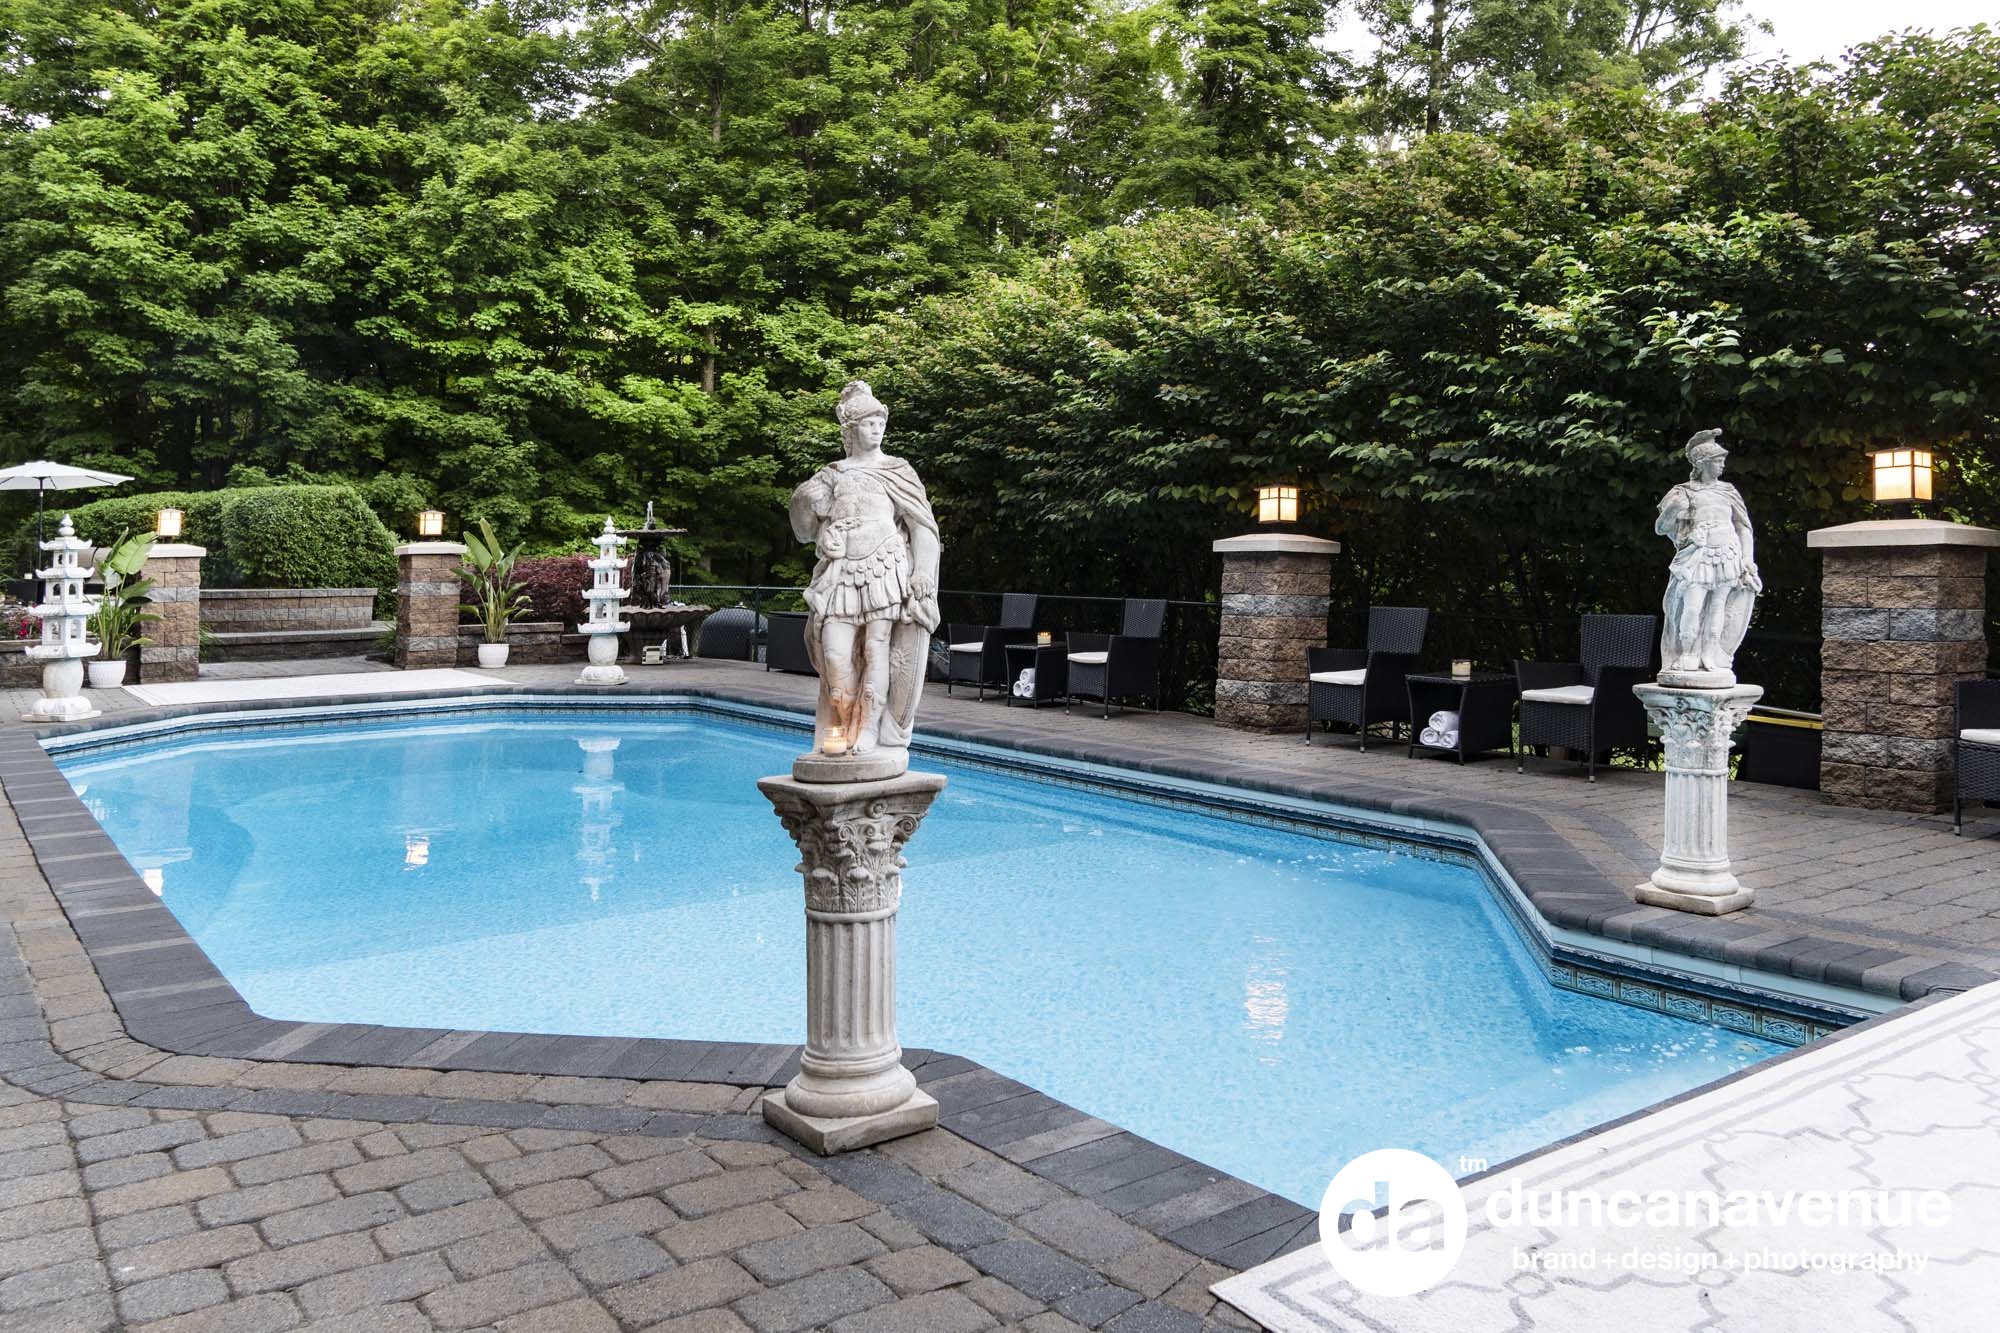 The Hudson Villa - property Branding and Real Estate Photography by Maxwell Alexander